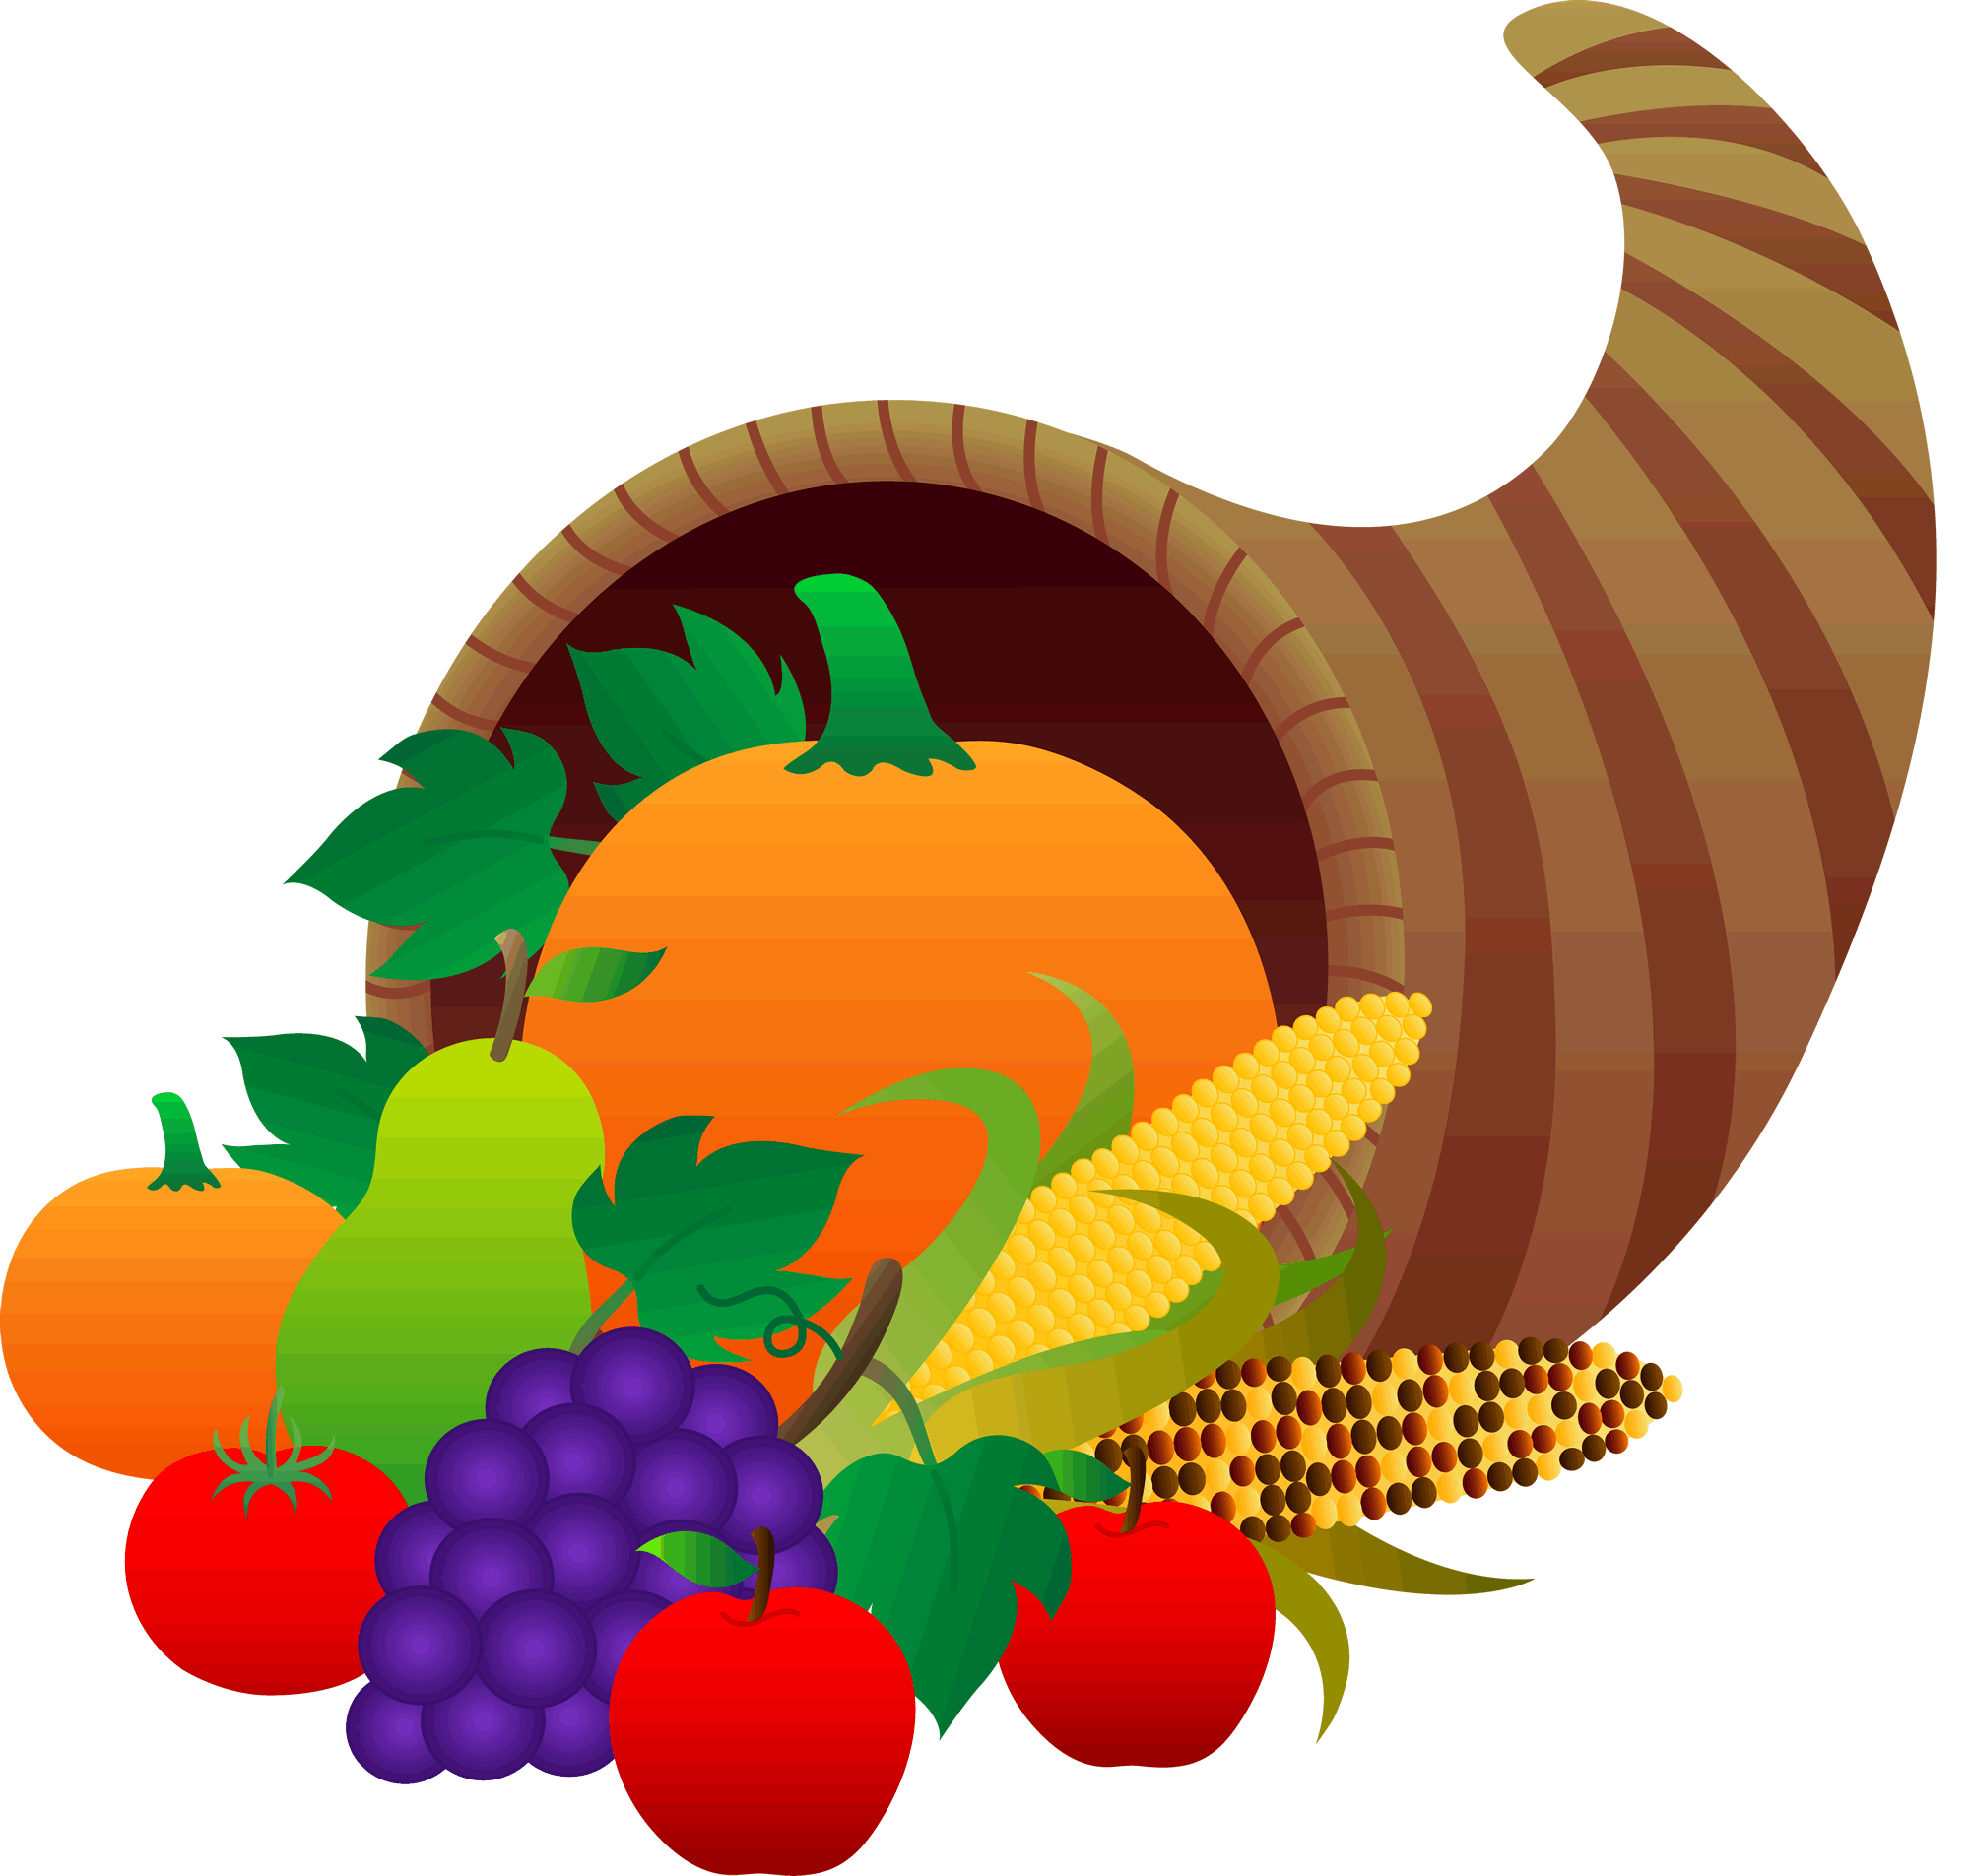 Free Thanksgiving Gif Images, Download Free Clip Art, Free.